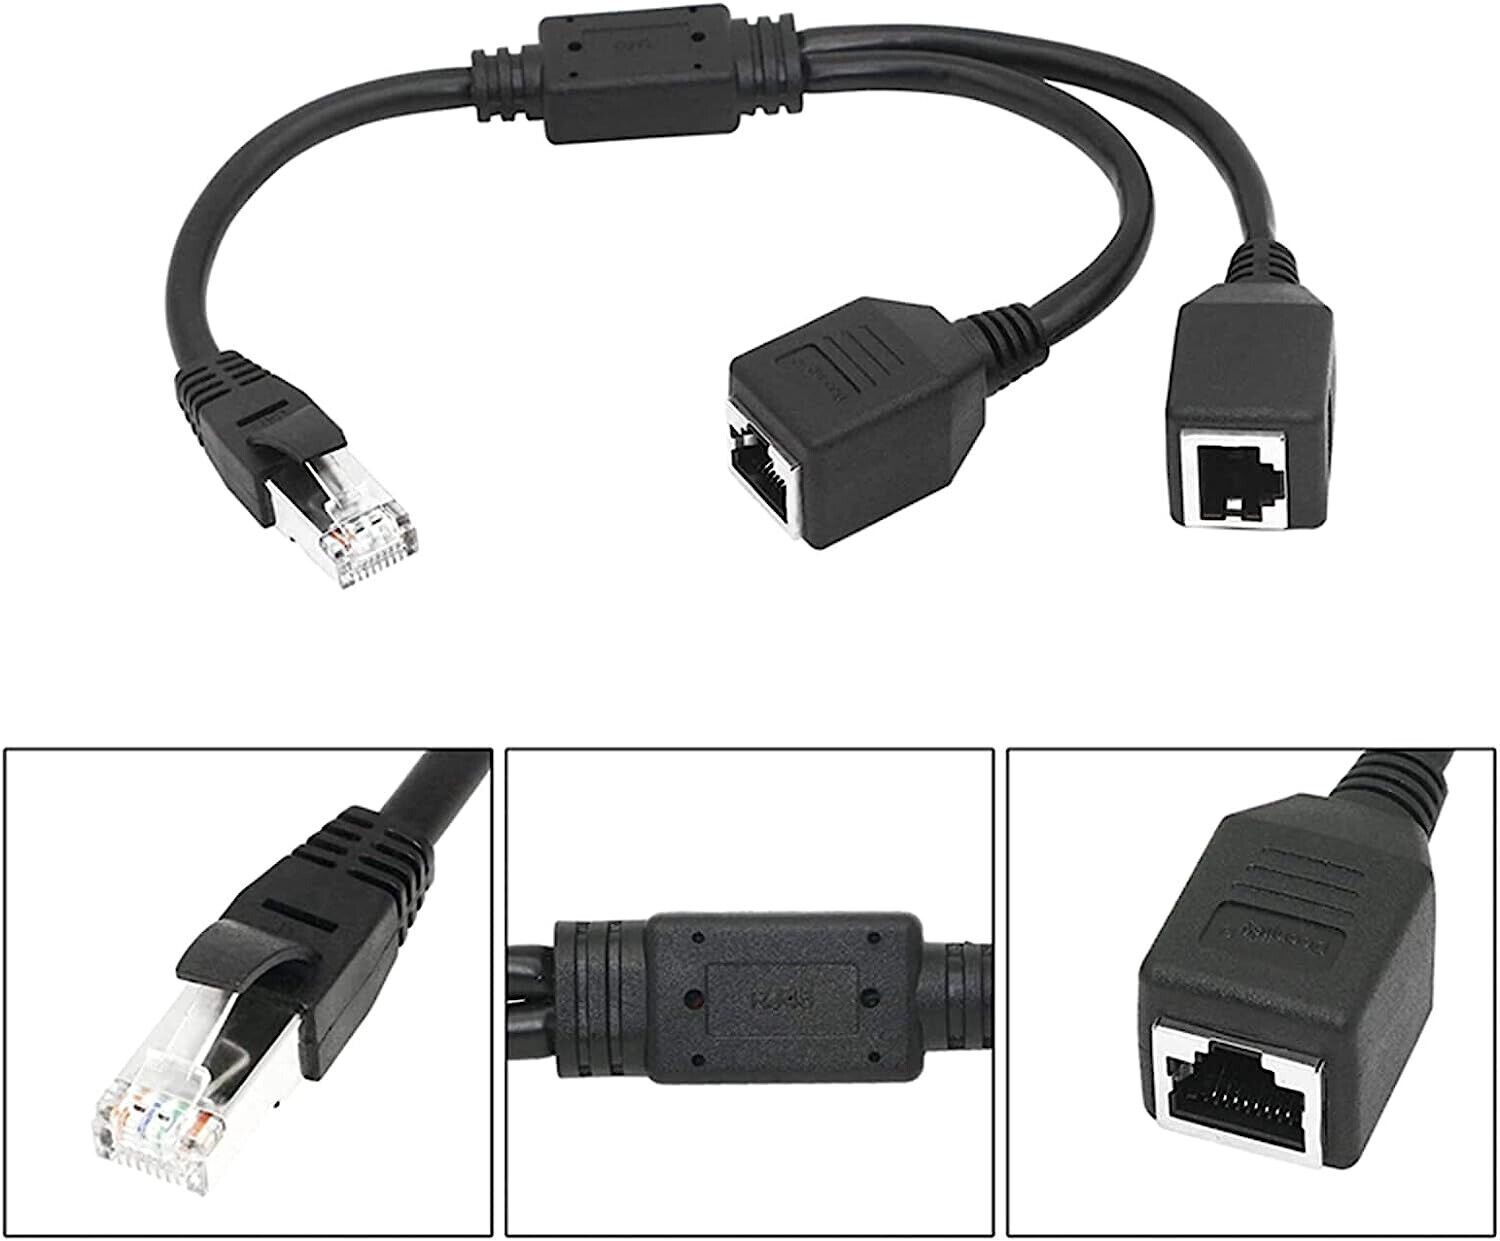 RJ45 Splitter Adapter 1 to 2/3 Ways CAT 7 6 5 LAN Ethernet Cable Connector